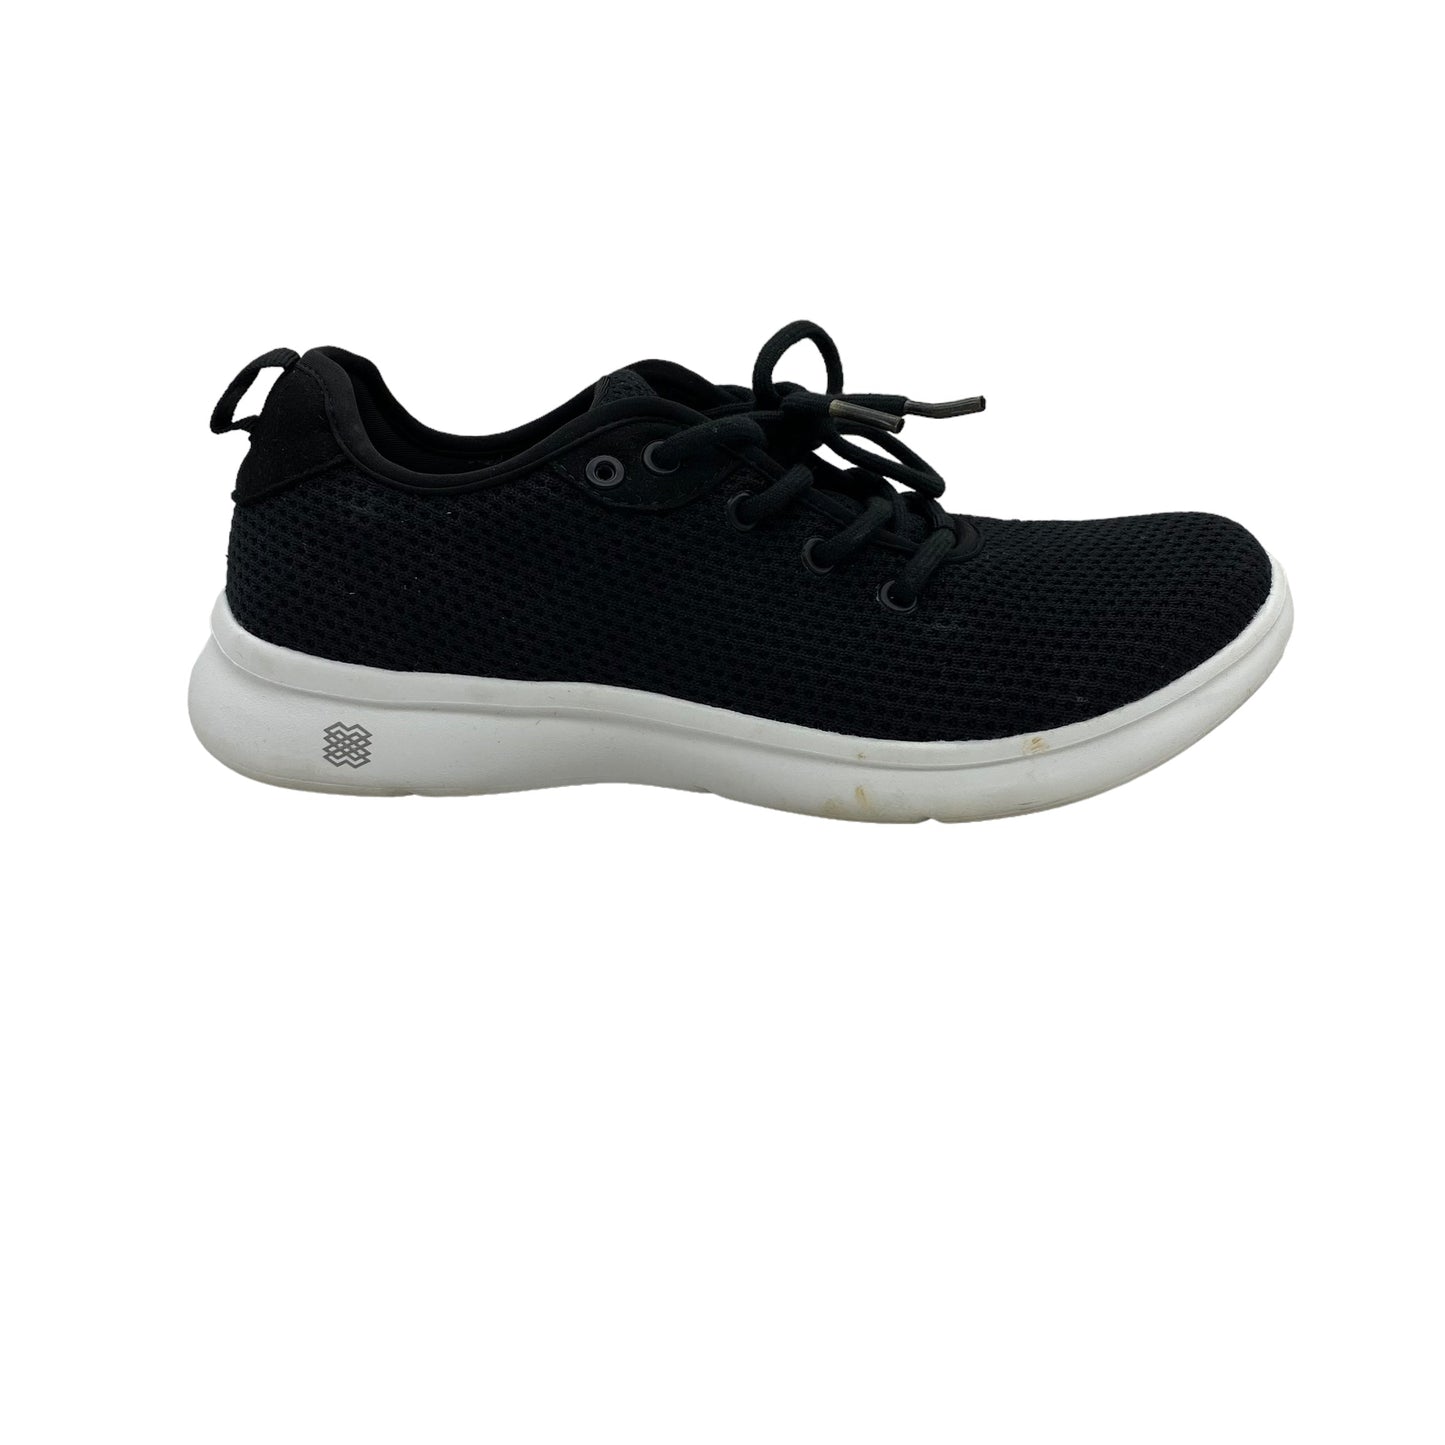 BLACK SHOES SNEAKERS by FLX Size:8